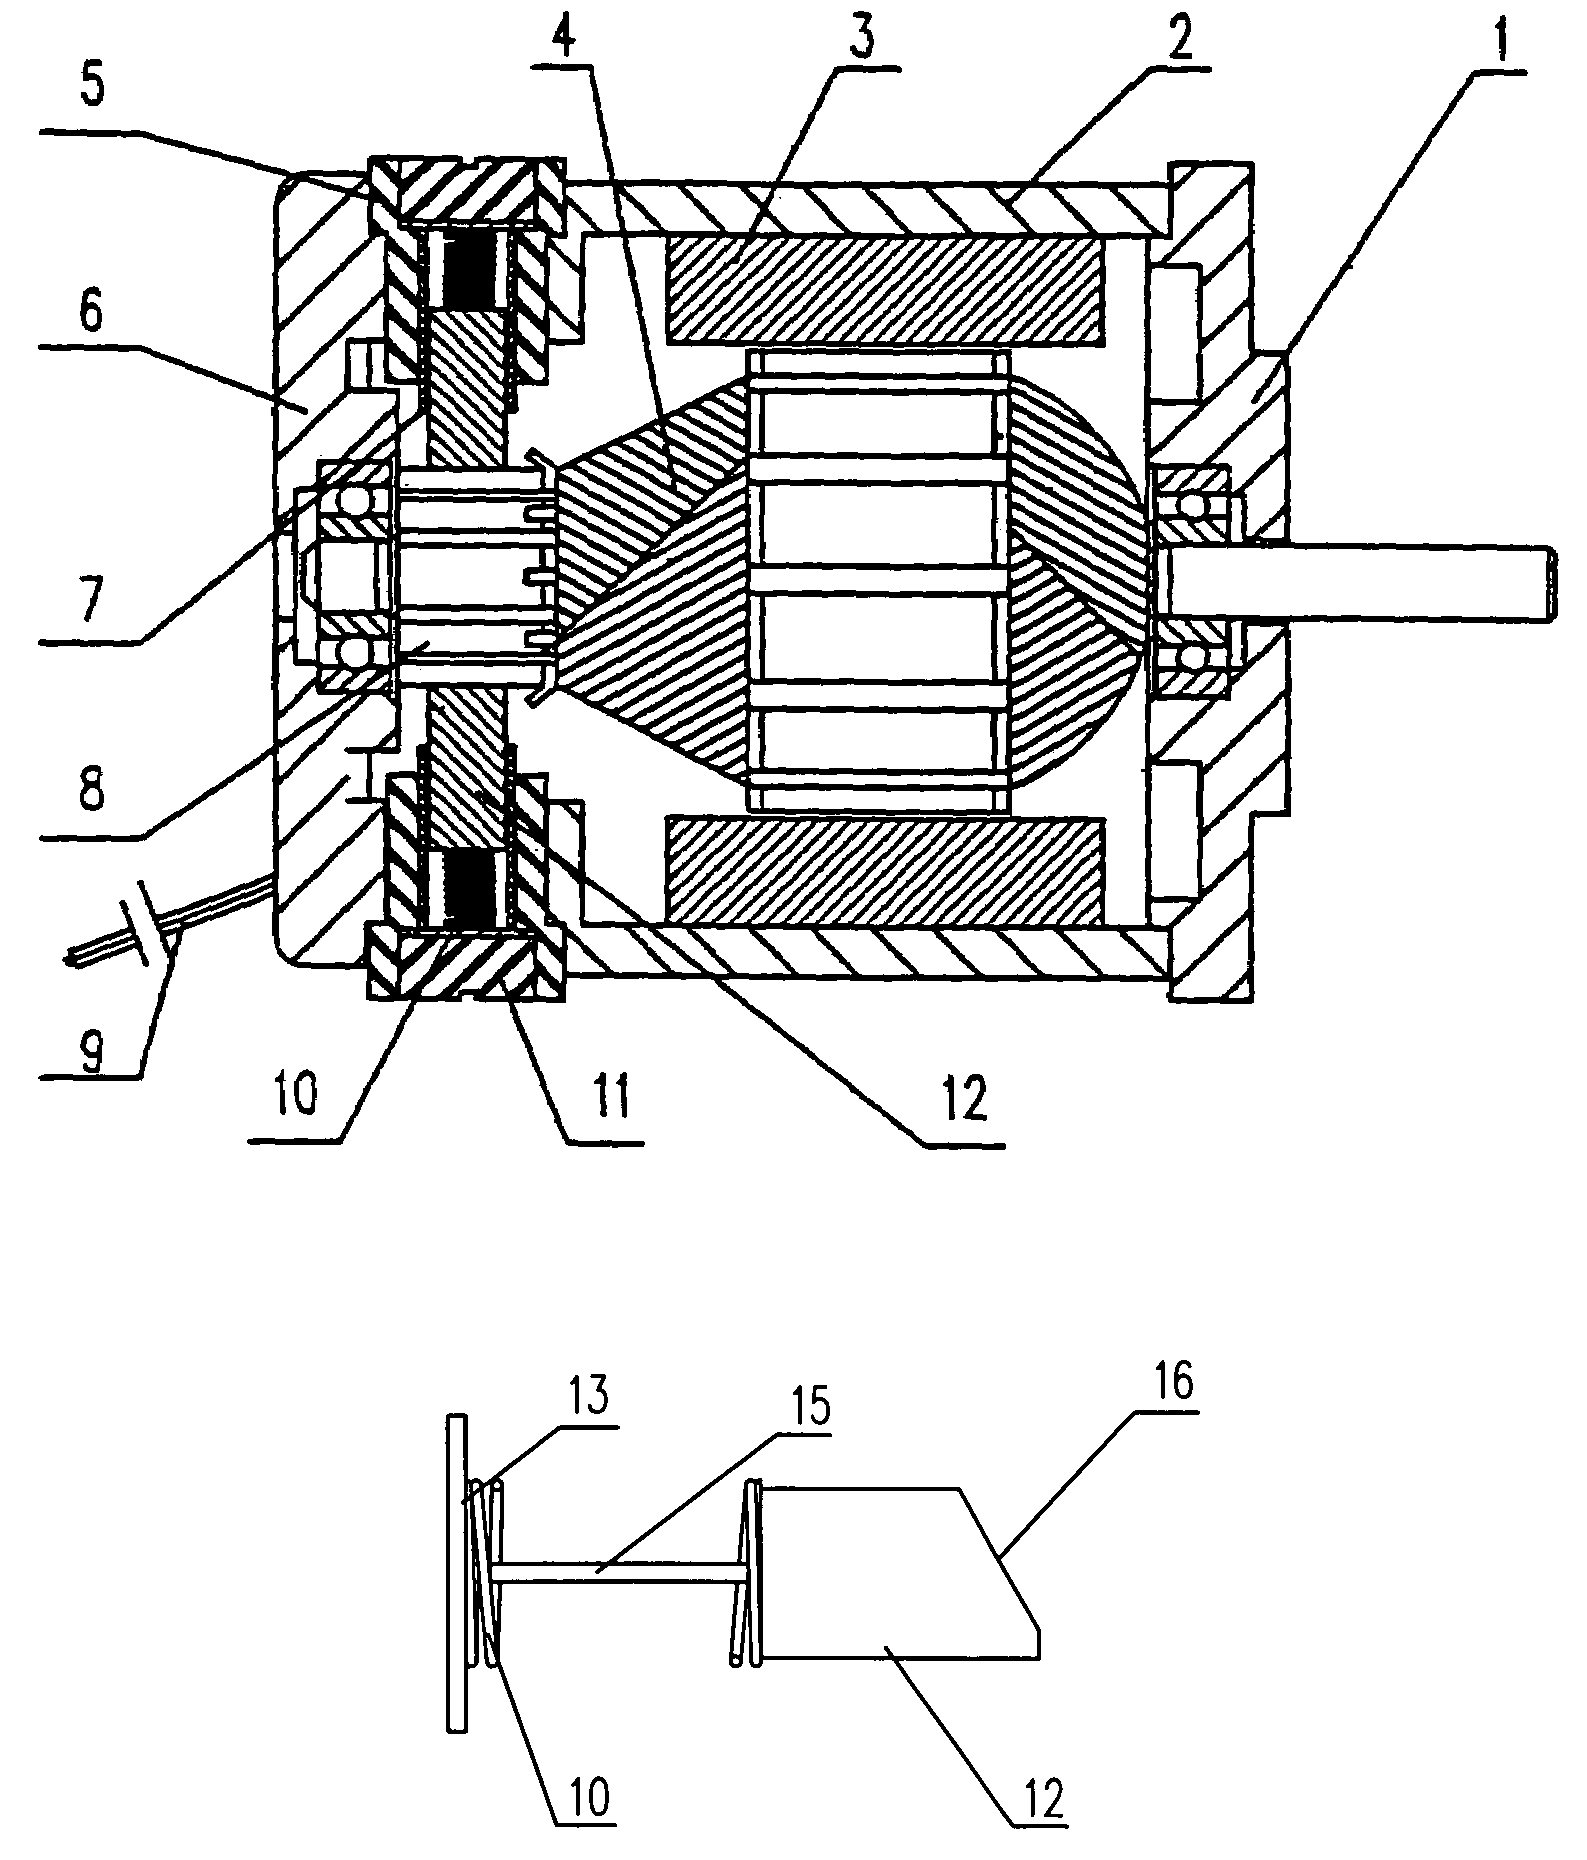 DC motor with externally mounted carbon brush